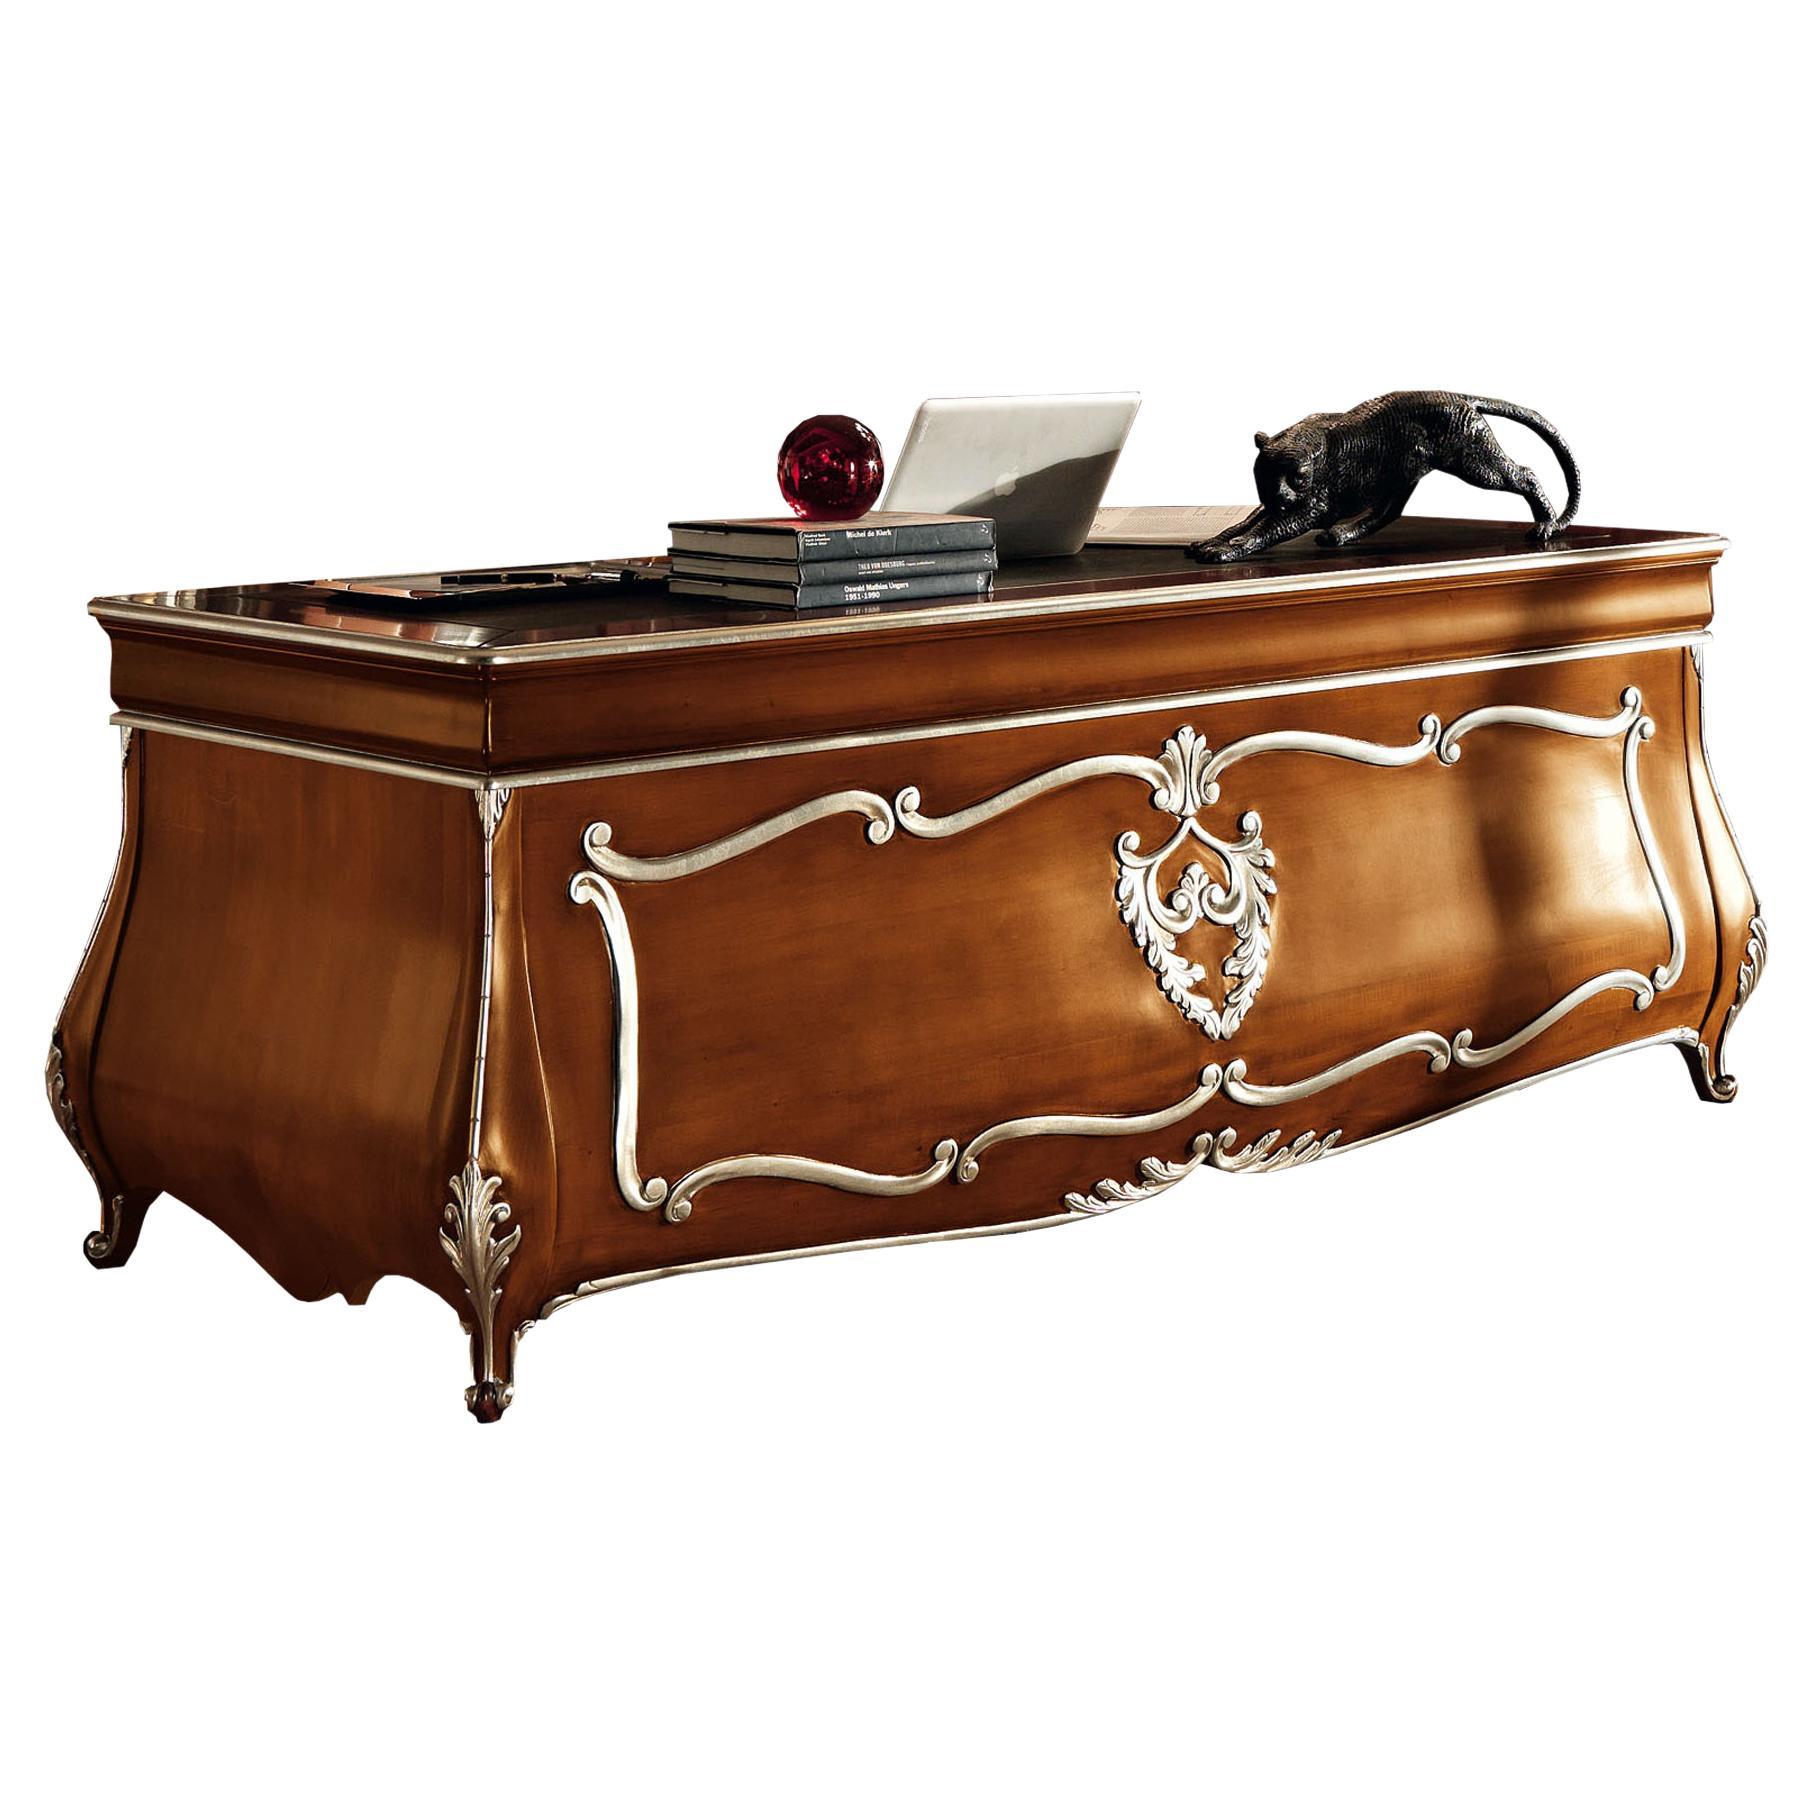 Complete your office with a high-end Italian baroque writing desk from the bespoke producer Modenese Luxury Interiors. This solid wood presidential desk features one drawer with Blumotion soft-closing system and radica veneer wooden upper surface.